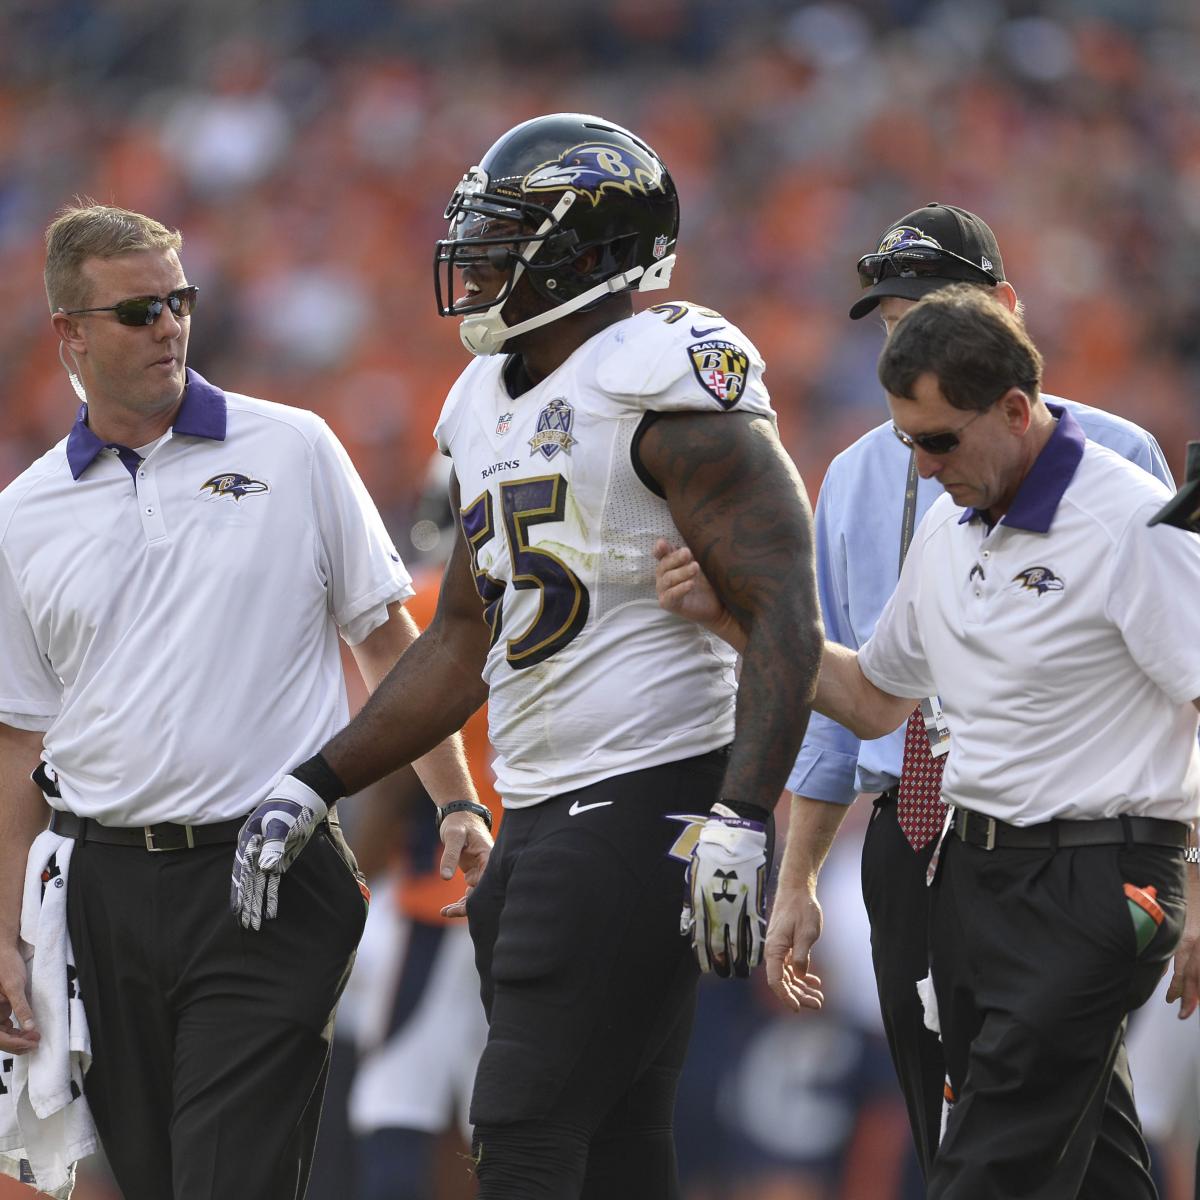 Terrell Suggs Injury Update: Ravens LB Out for Season with Torn Achilles